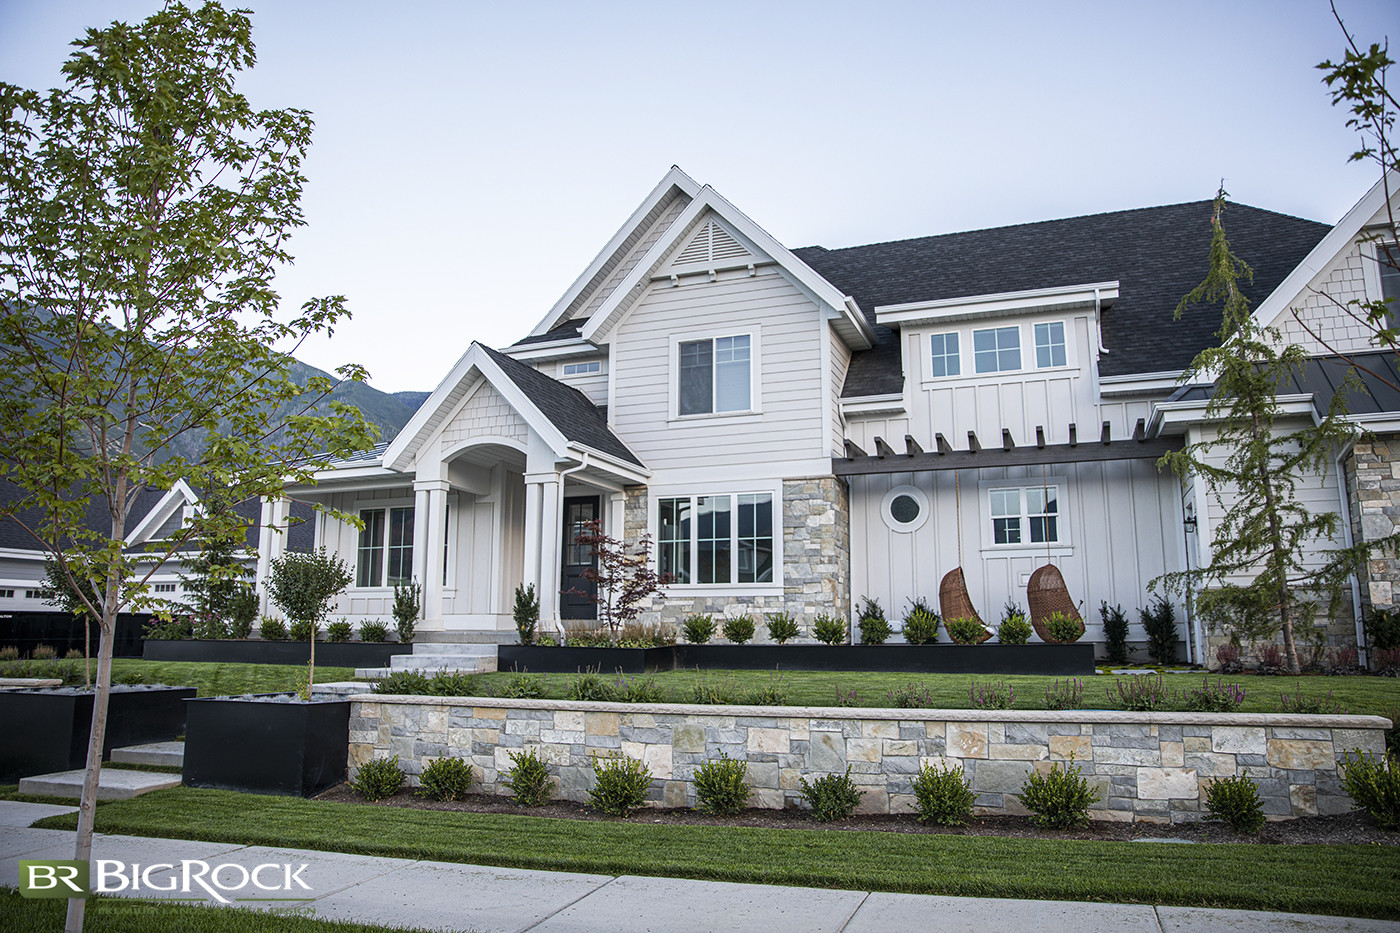 The Best Front Yard Landscaping Ideas For Your Home - Big Rock